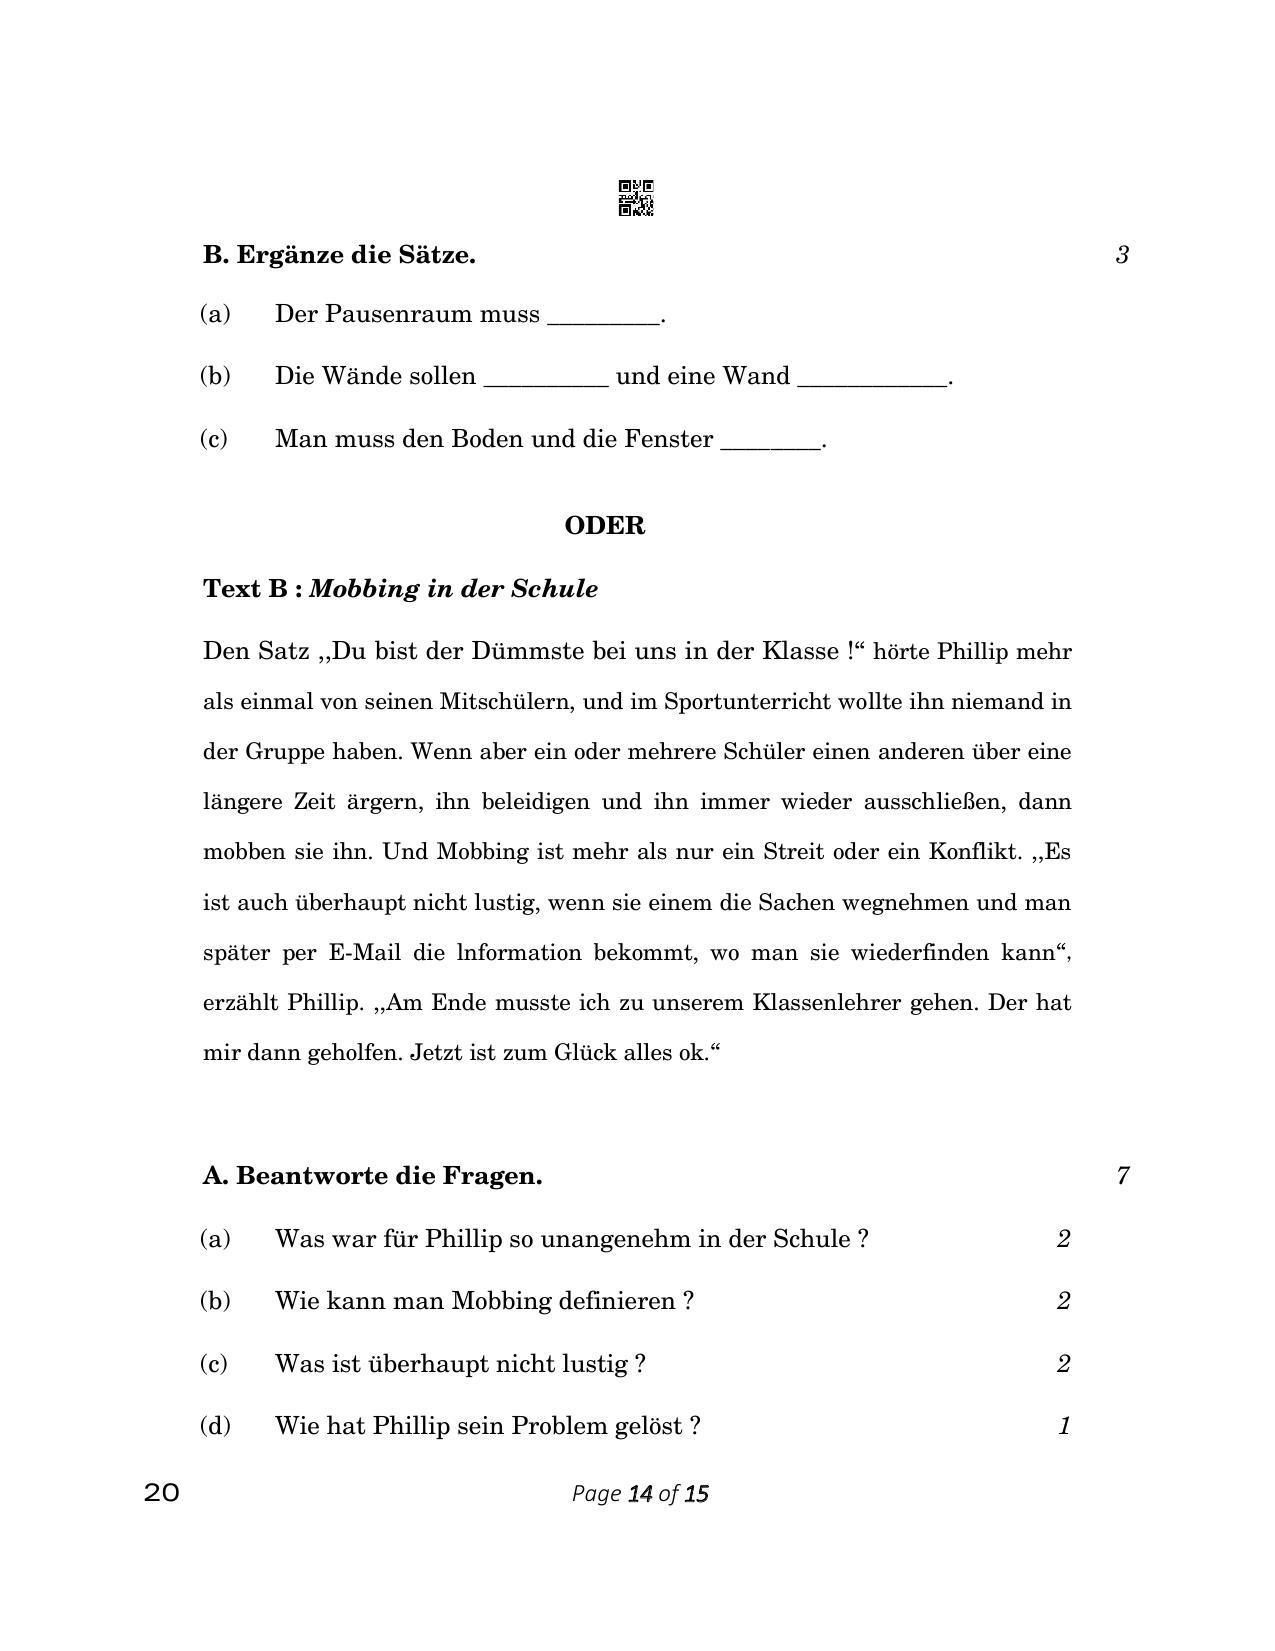 CBSE Class 12 20_German 2023 Question Paper - Page 14